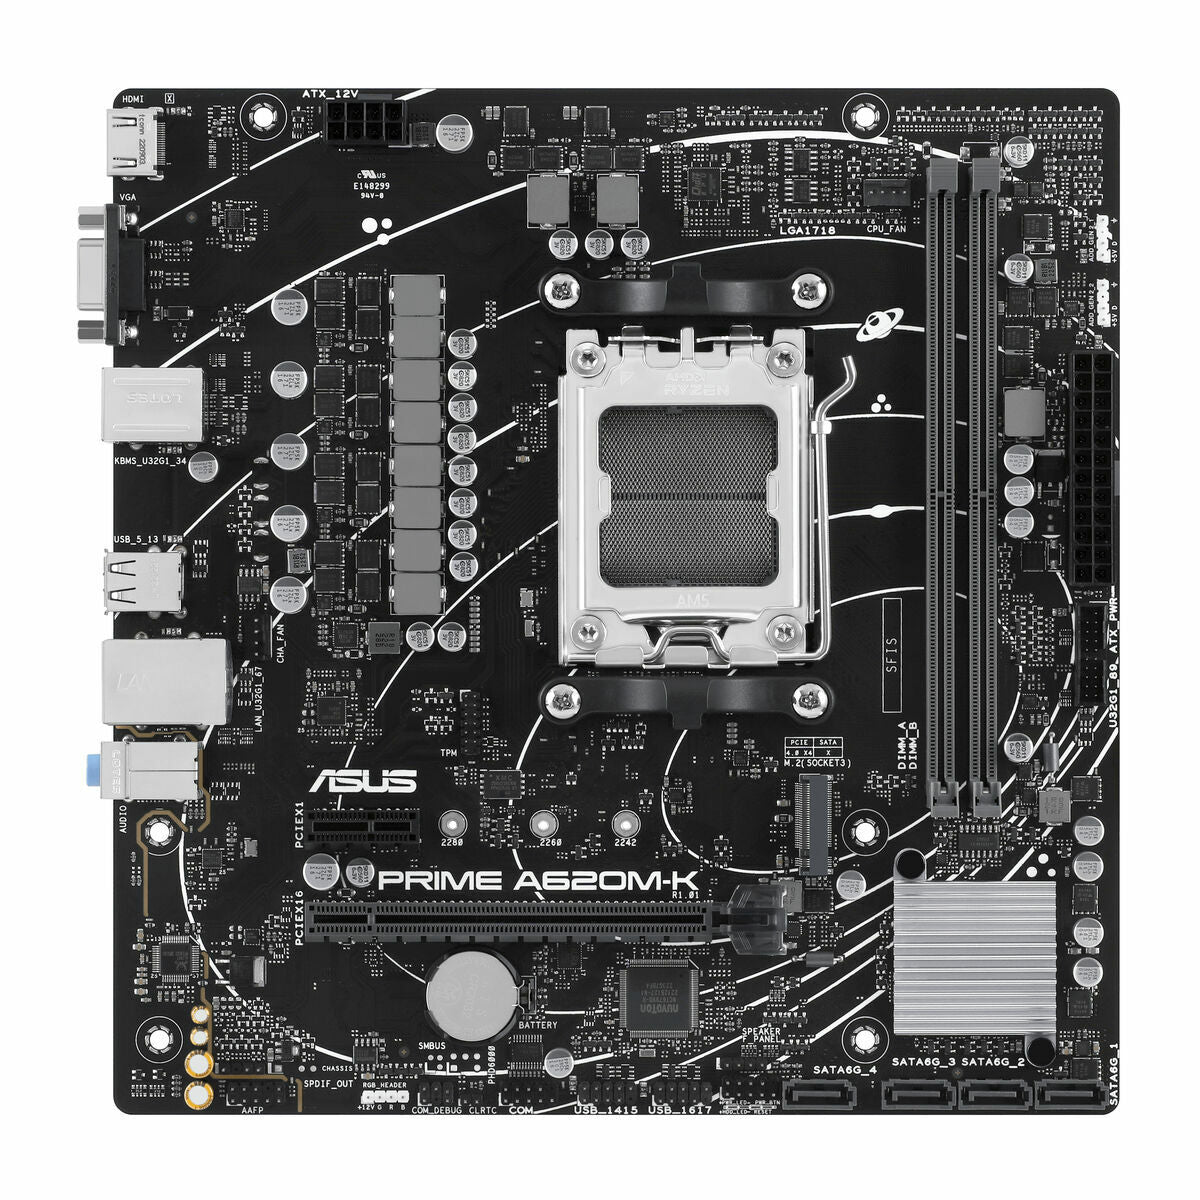 Motherboard Asus A620M-K AMD AM5 AMD, Asus, Computing, Components, motherboard-asus-a620m-k-amd-am5-amd, Brand_Asus, category-reference-2609, category-reference-2803, category-reference-2804, category-reference-t-19685, category-reference-t-19912, category-reference-t-21360, computers / components, Condition_NEW, Price_100 - 200, Teleworking, RiotNook